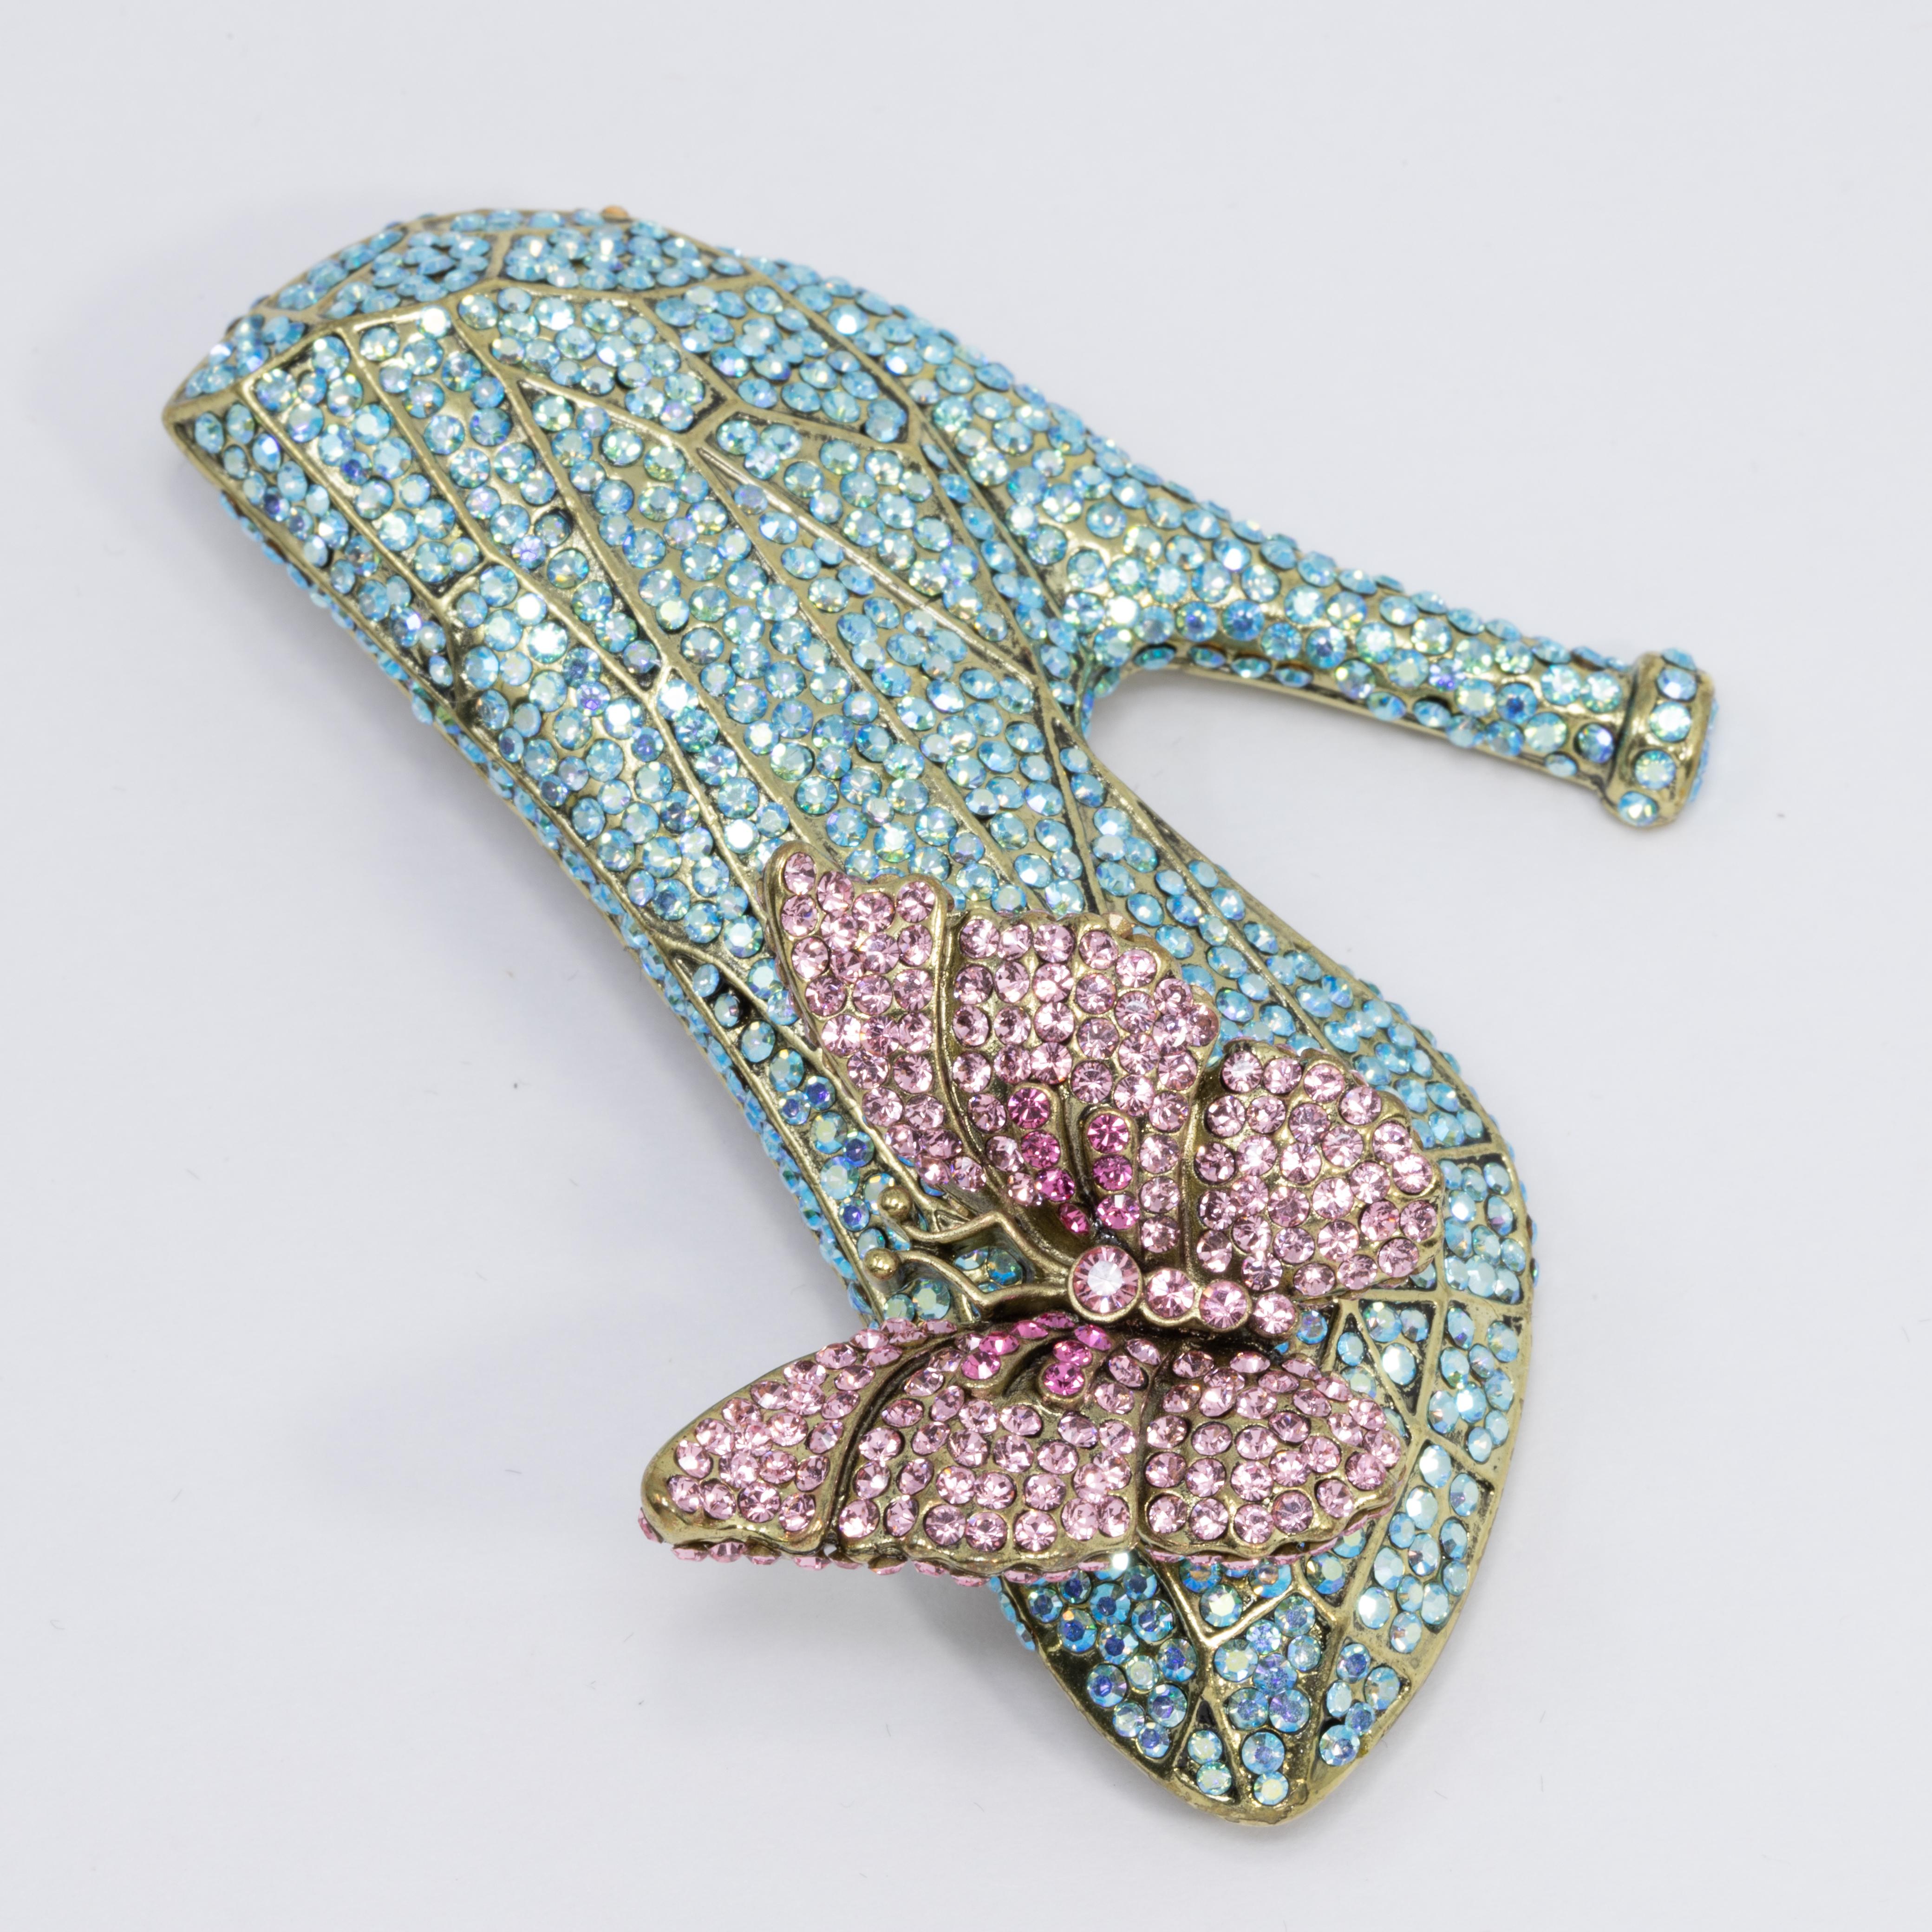 Cinderella-inspired glass slipper pin brooch from Heidi Daus. Features a pave crystal shoe and butterfly. Perfect for your own happily ever after!

Limited-time, retired collection.

Hallmarks: Heidi Daus, CN